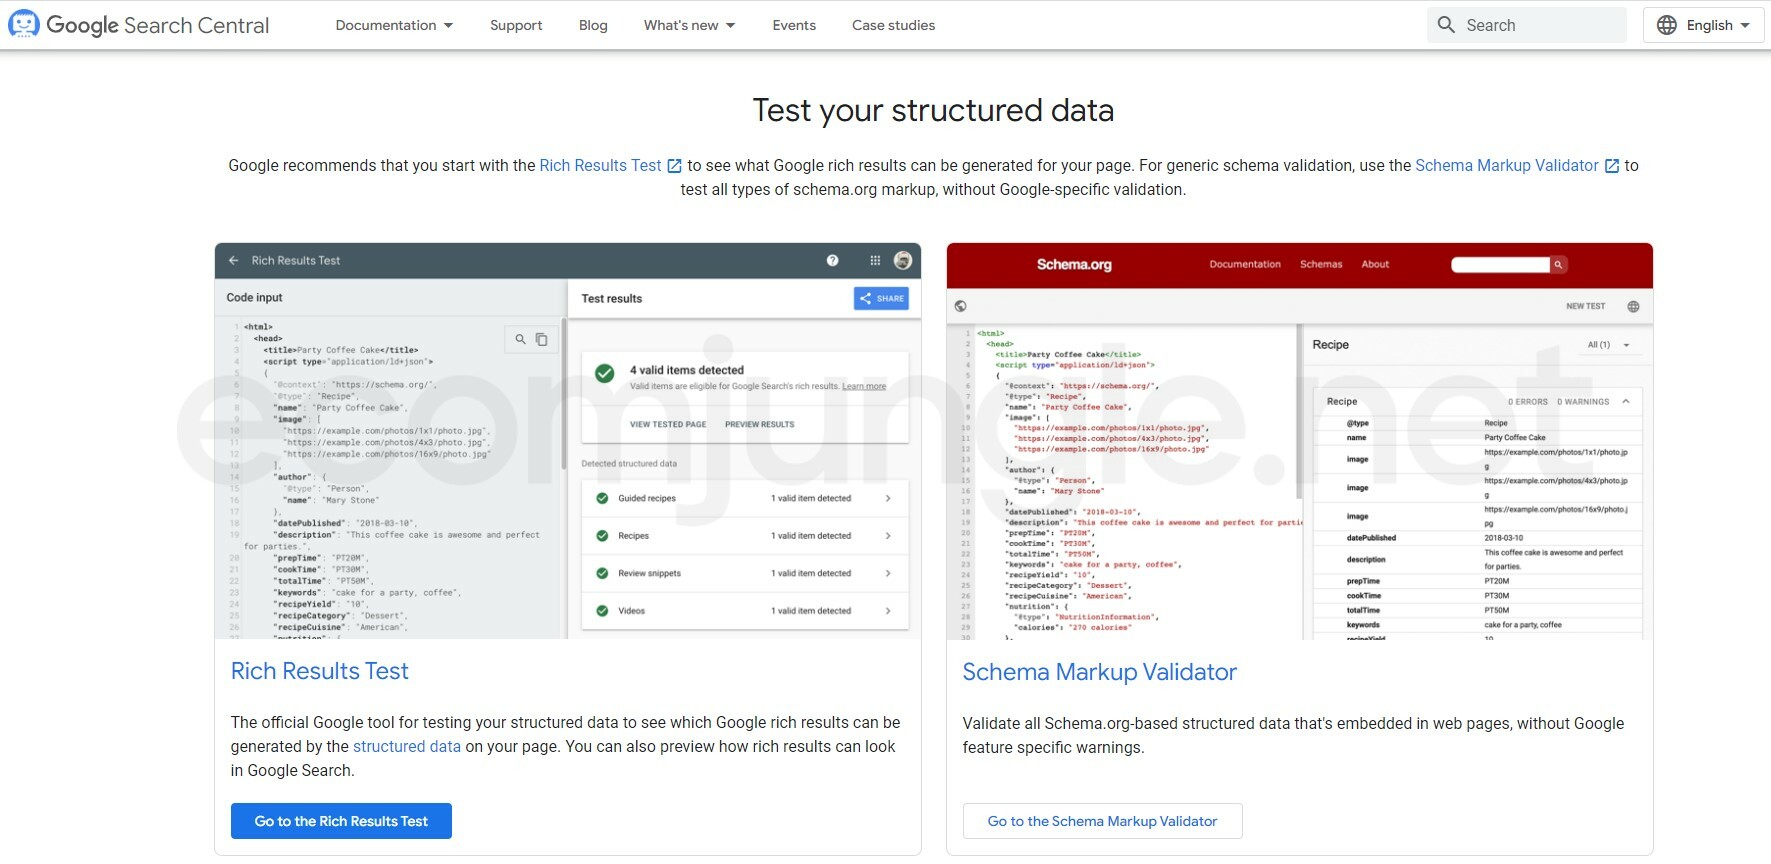 google-search-central-seo-auditing-tool-focused-on-testing-rich-results